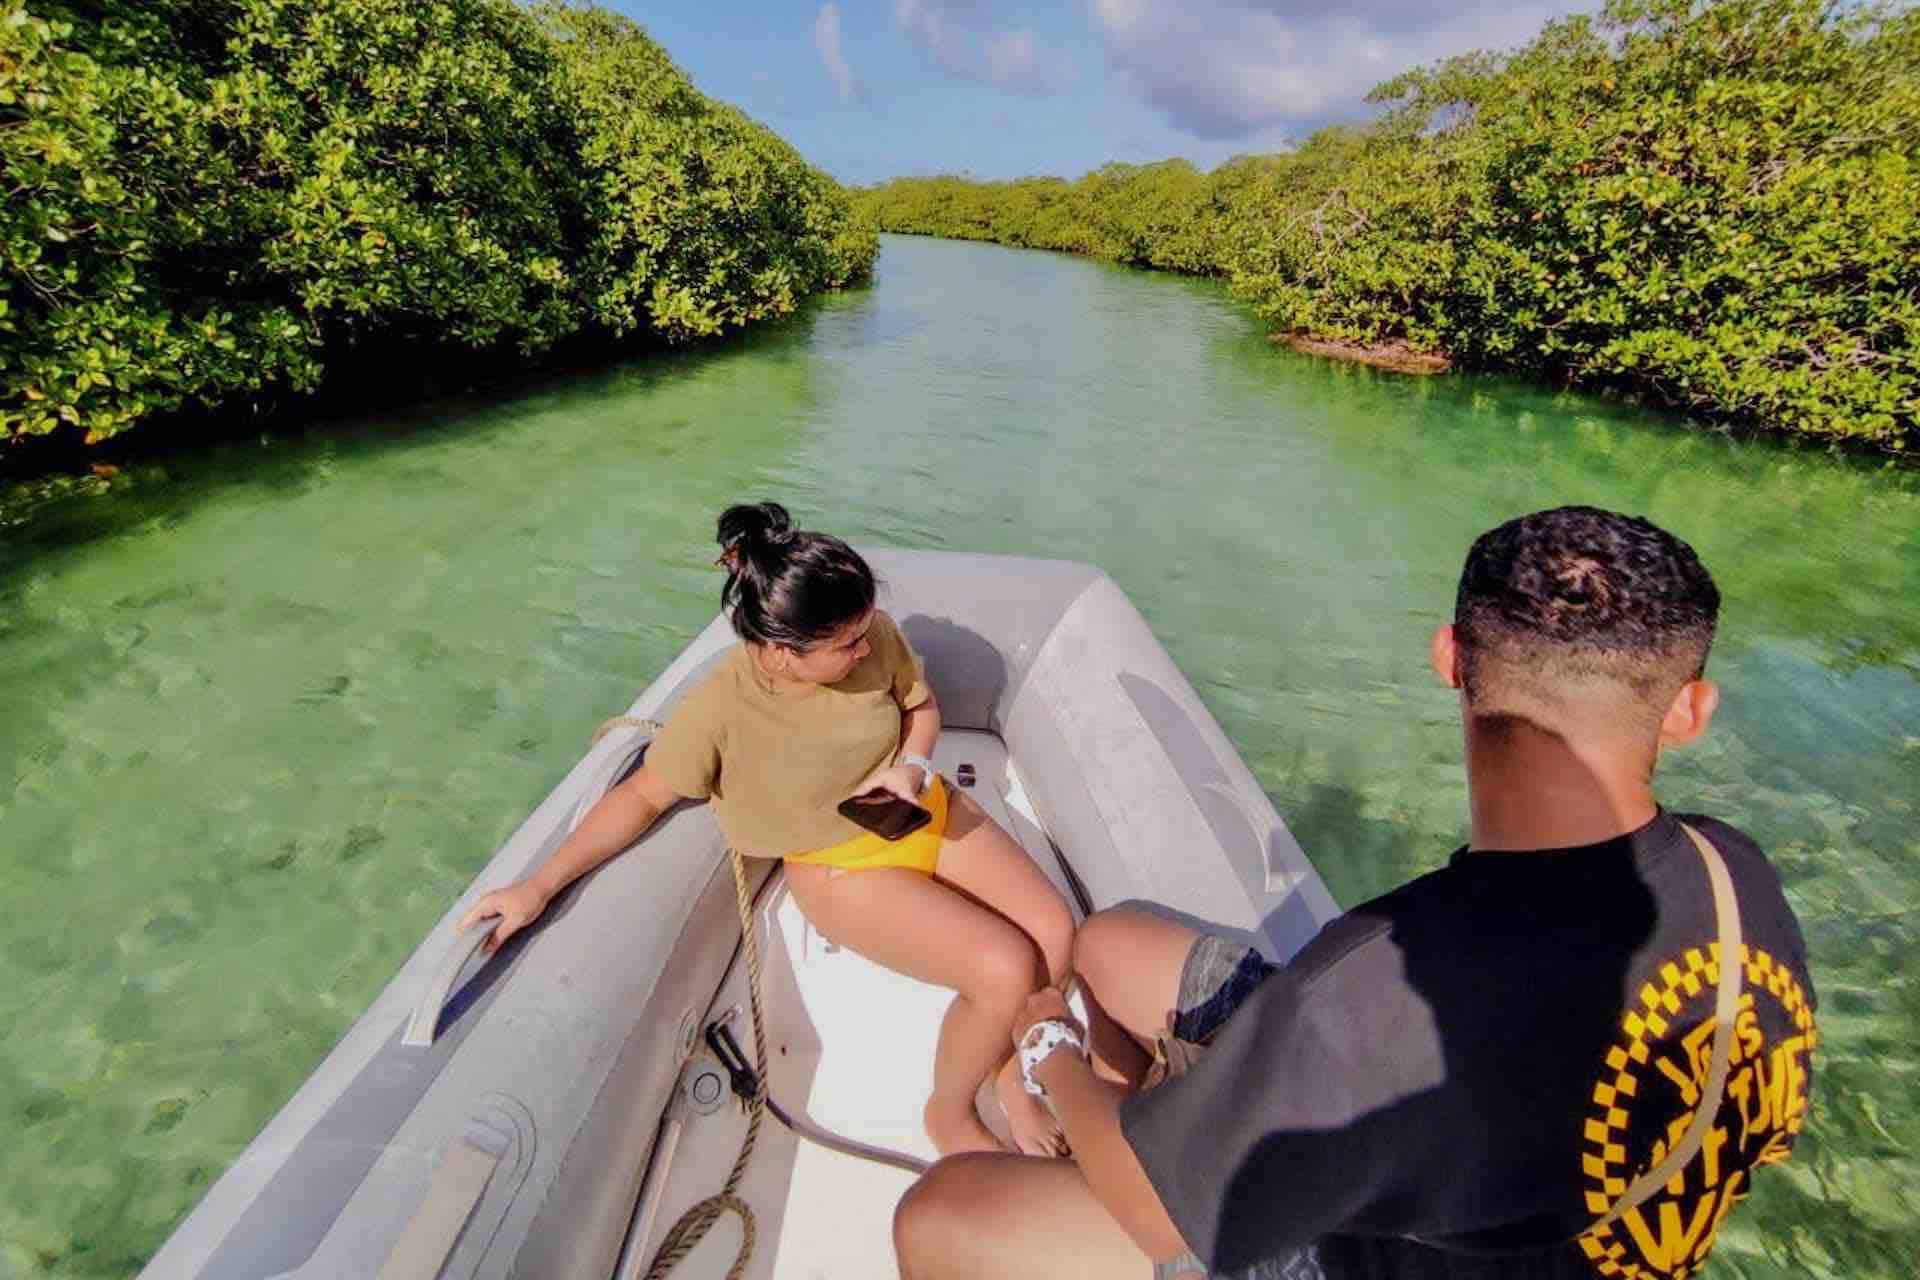 Isla Grande Panama Caribbean Coast island hopping tou guests in Tunnel of Love mangrove forest on lancha boat